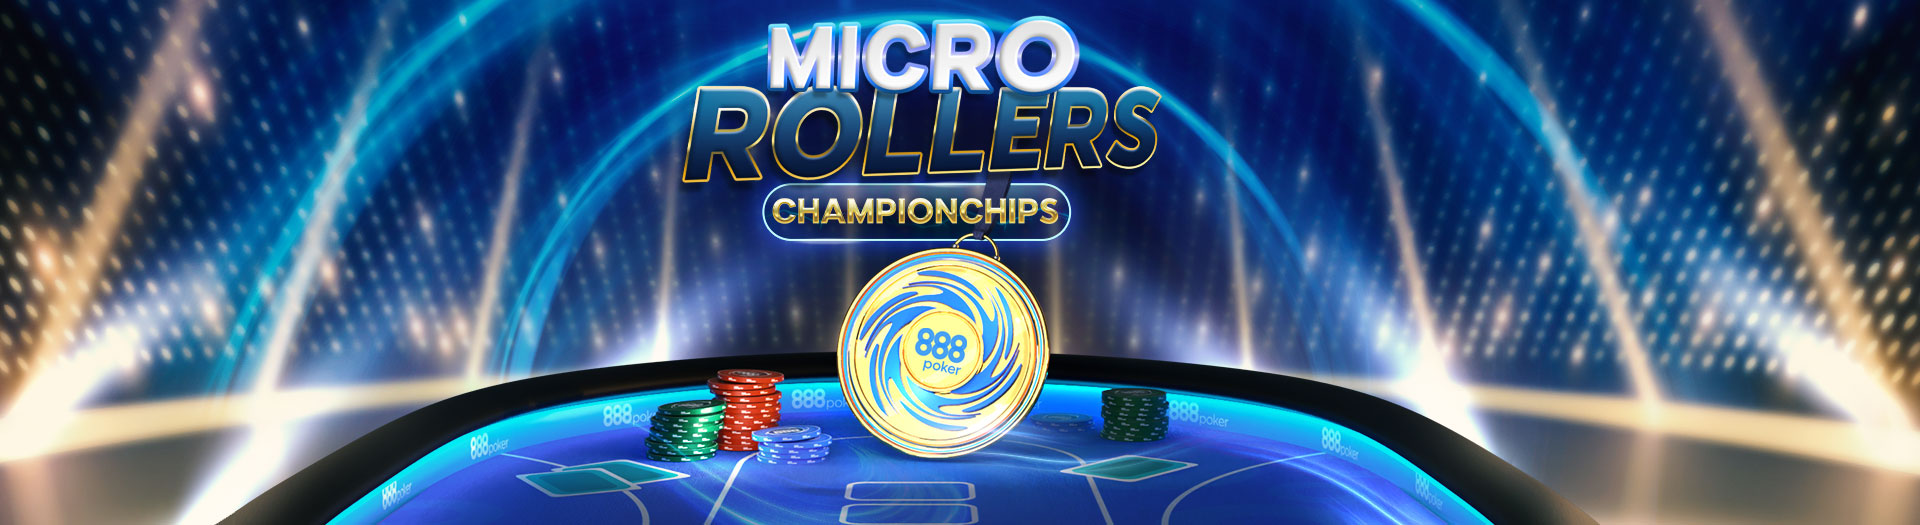 TS-66525-Micro-Rollers-ChampionChips-LP-PC